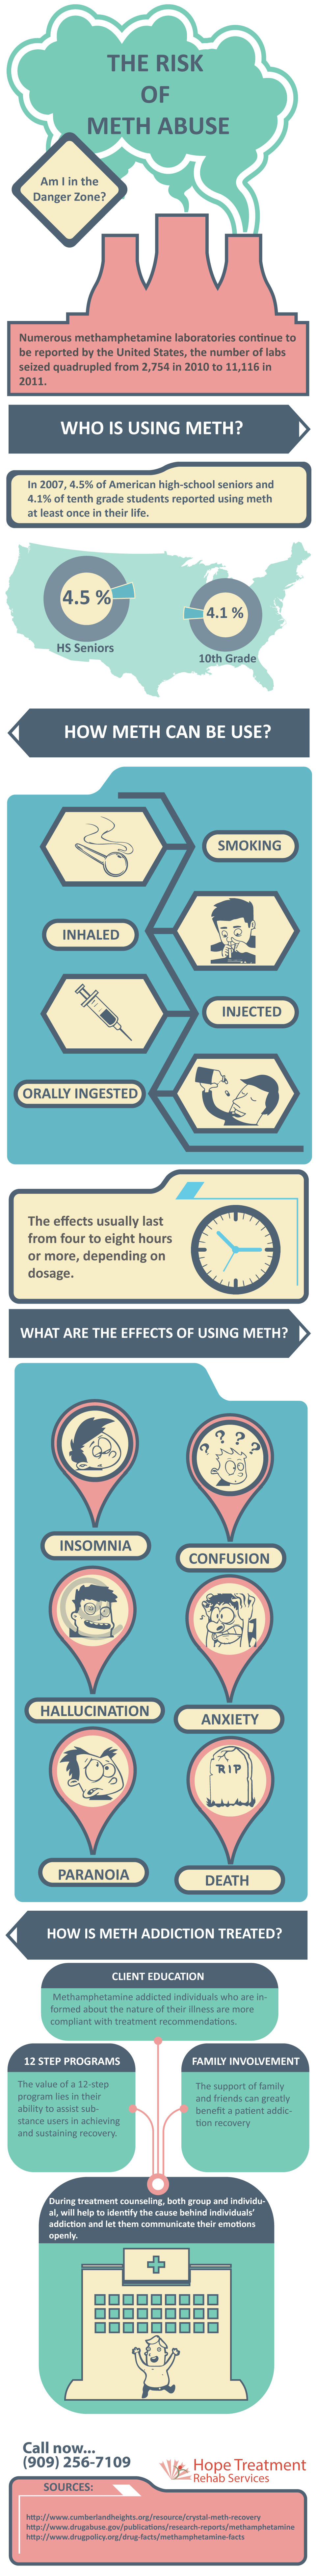 The Risk of Meth Abuse